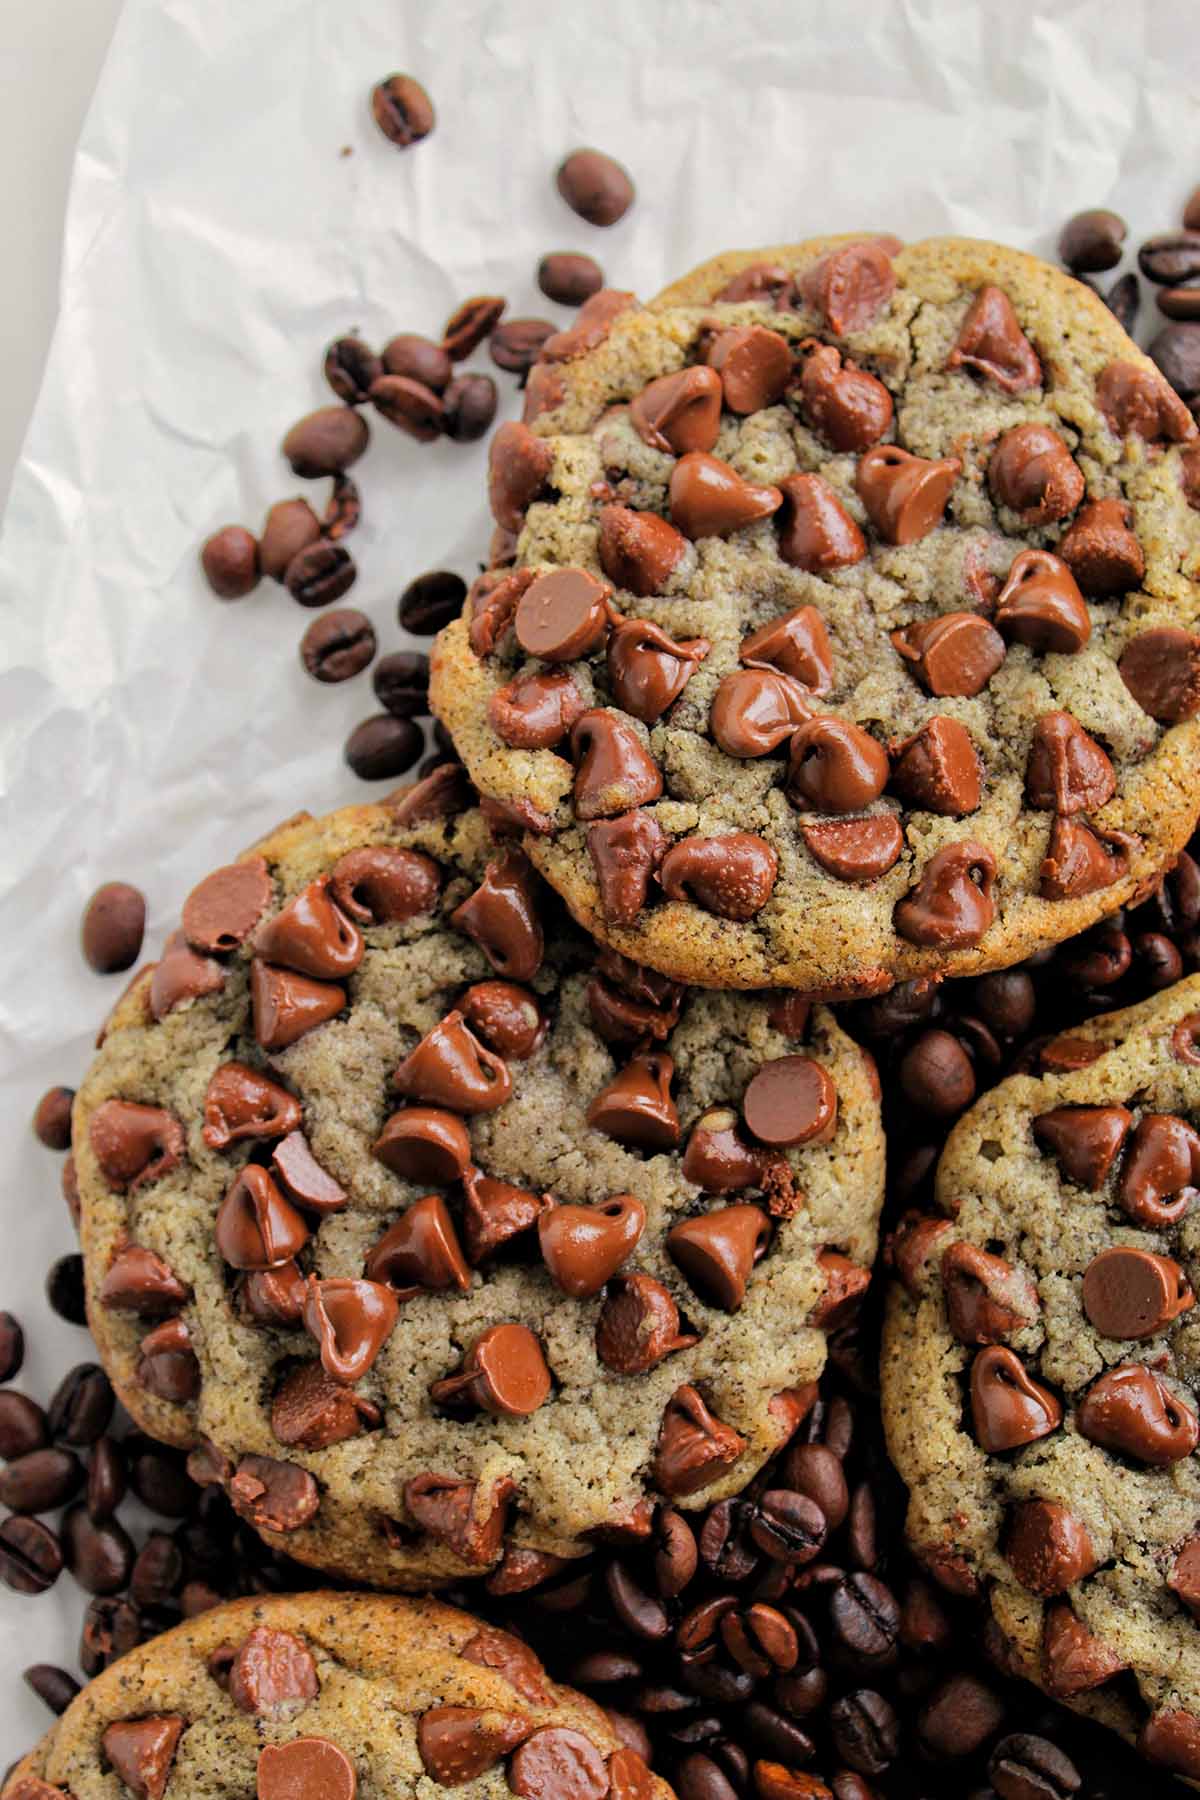 chocolate chip cookies laying on coffee beans.